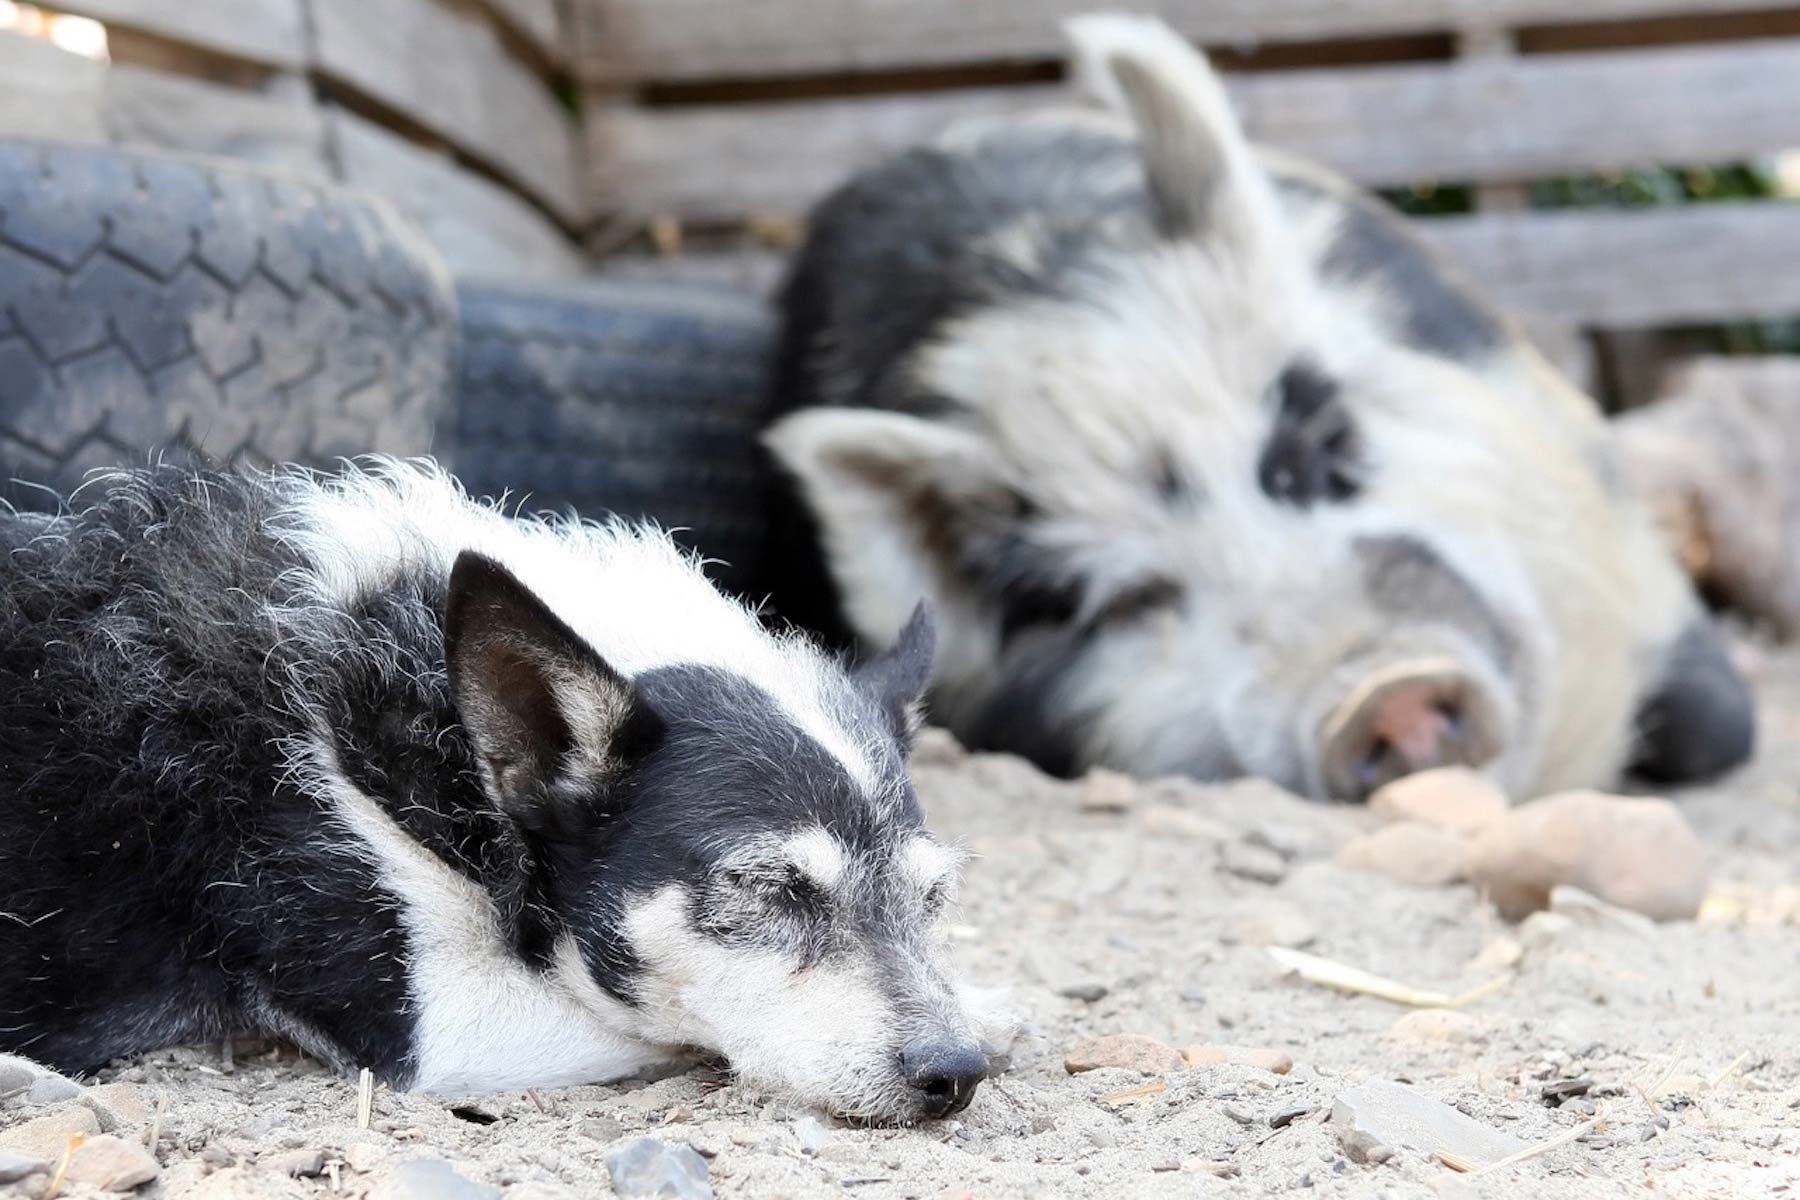 Pigs share many characteristics with dogs